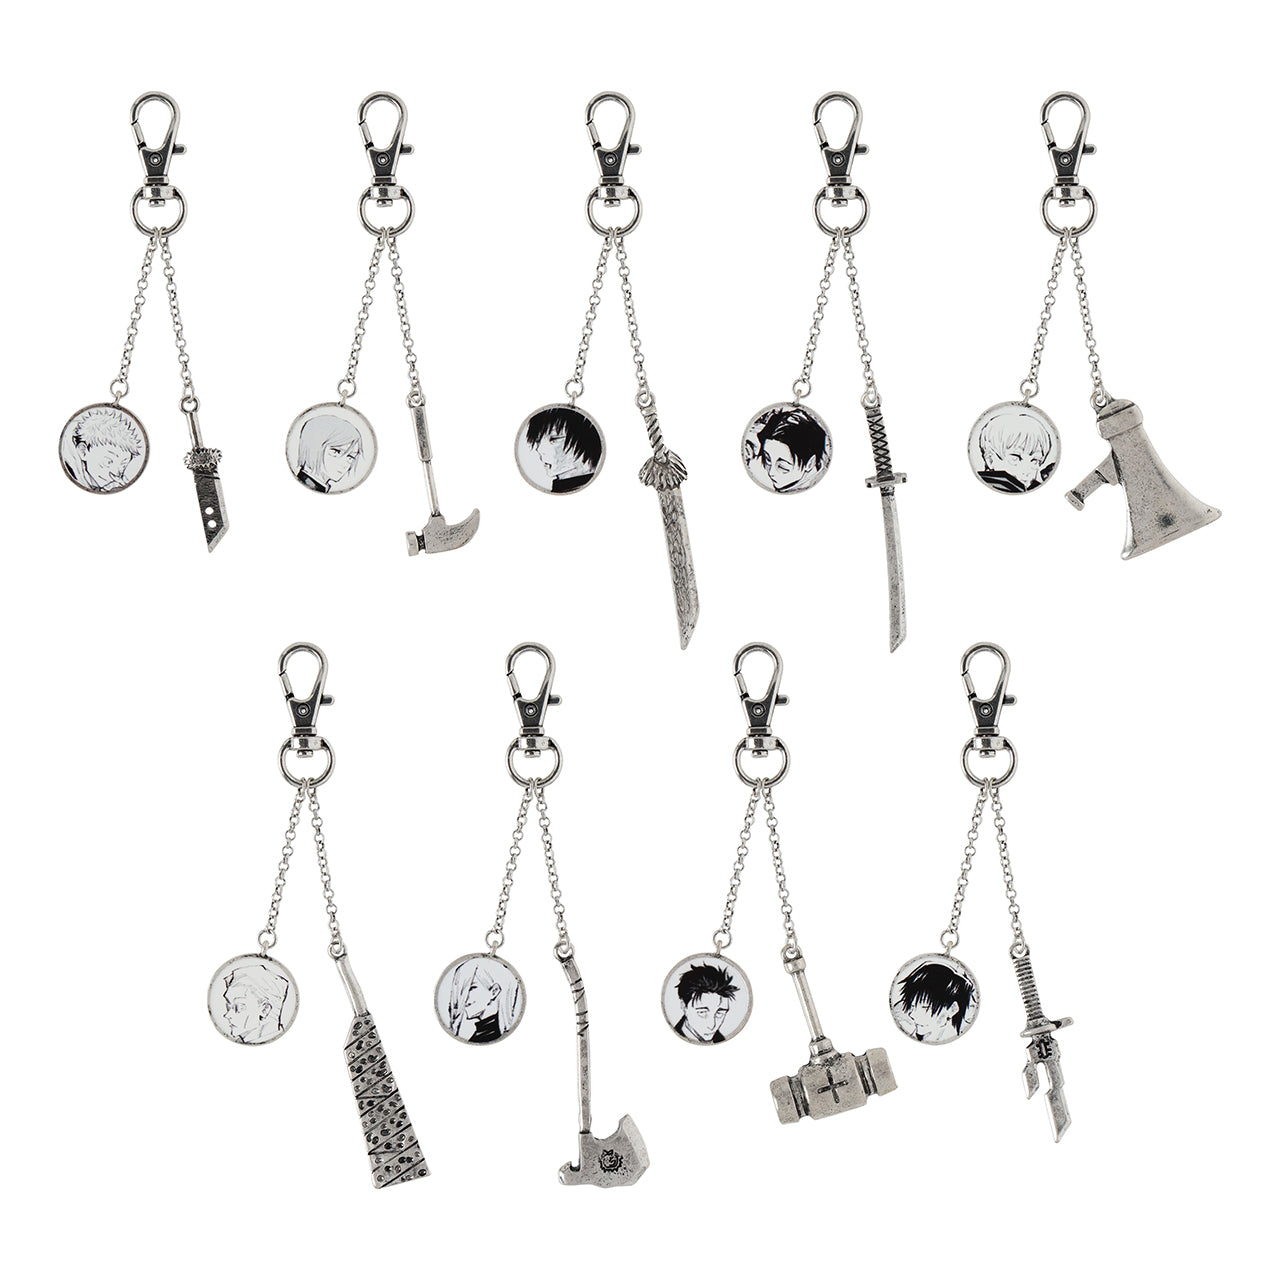 Weapon charm collection (9 types in total/1 random type included) - Jujutsu Kaisen Exhibition